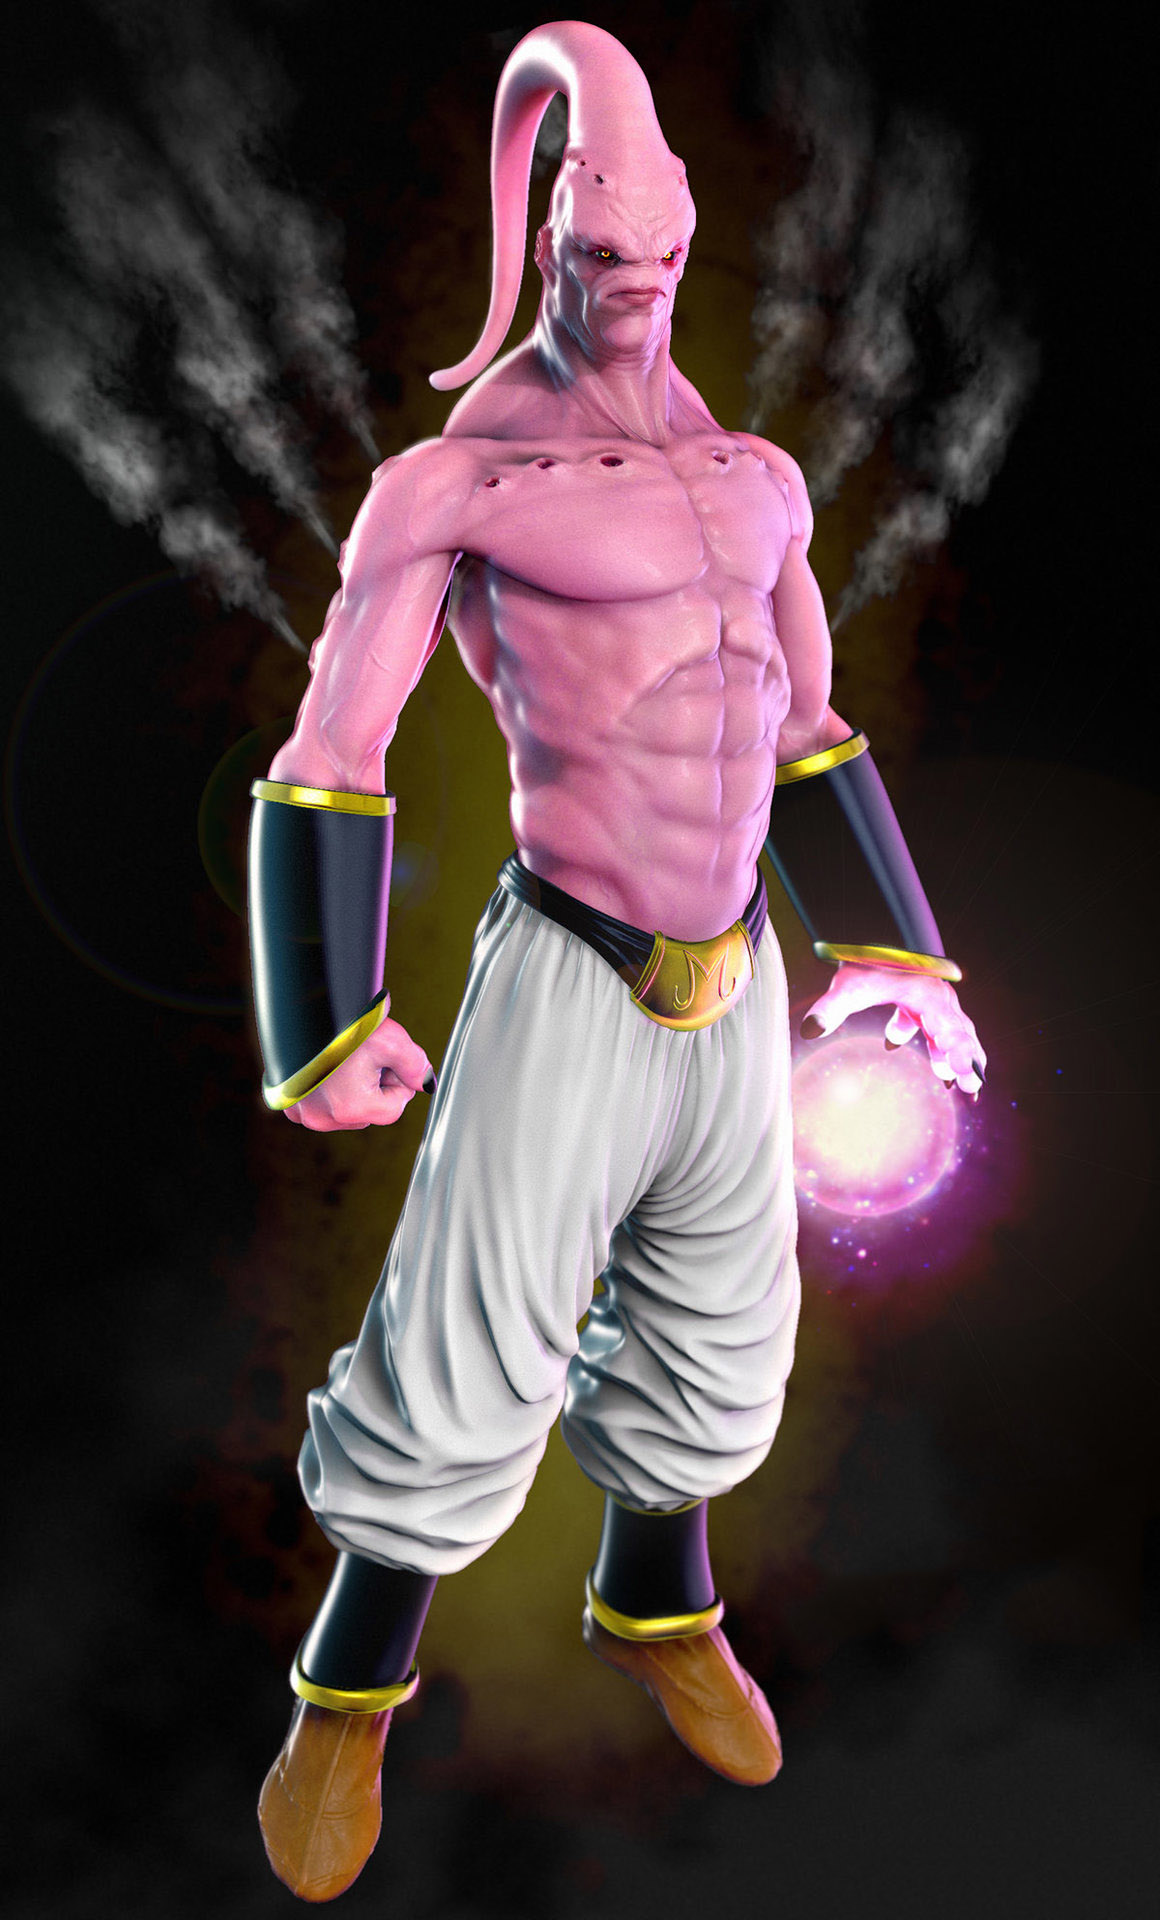 View, Download, Rate, and Comment on this Super Buu Art. art,arts,artistic,...